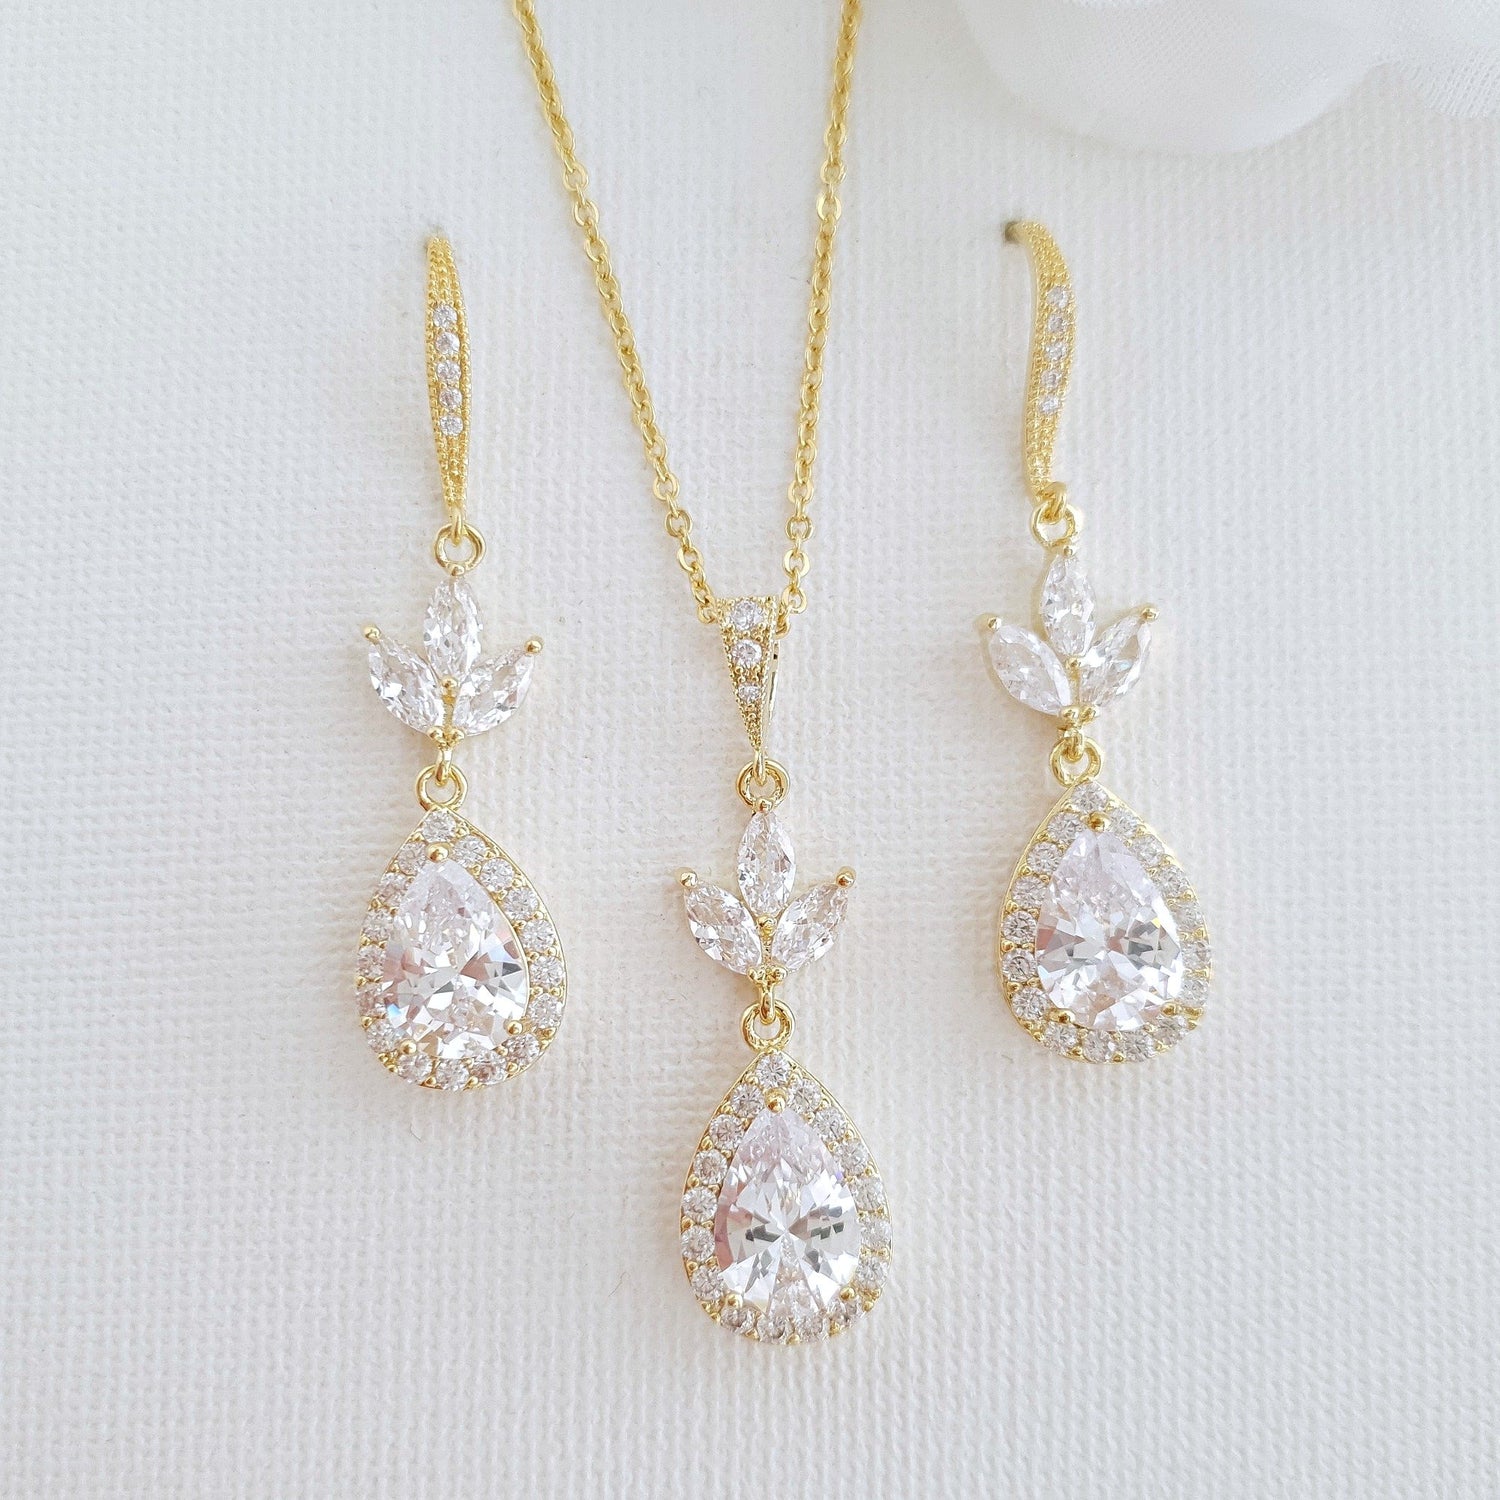 14K Yellow Gold Necklace and Earrings Set for Brides-Lotus - PoetryDesigns